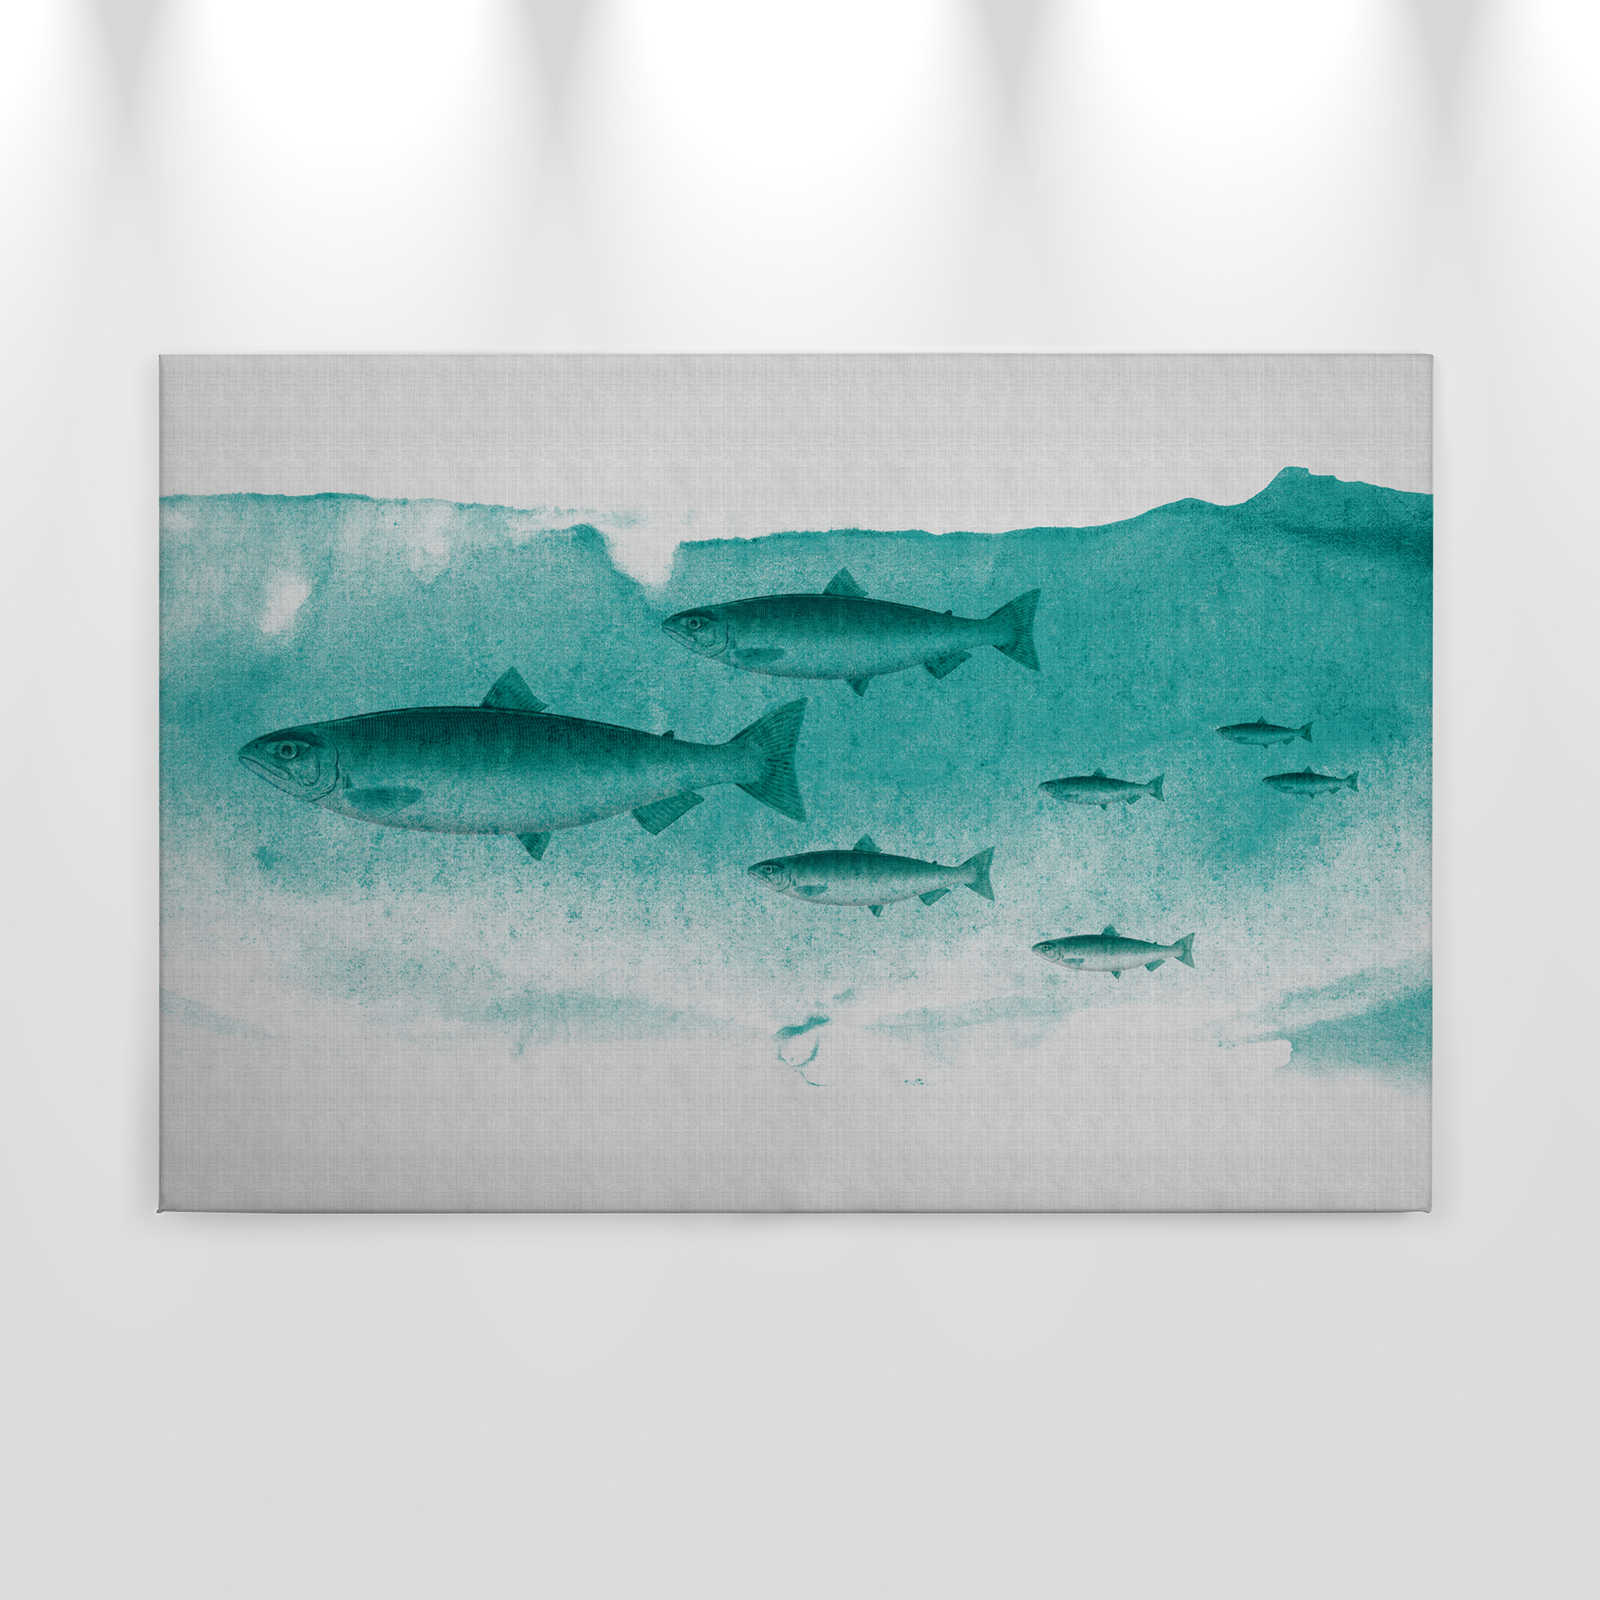             Into the blue 2 - Fish watercolour in green as canvas picture - natural linen structure - 0.90 m x 0.60 m
        